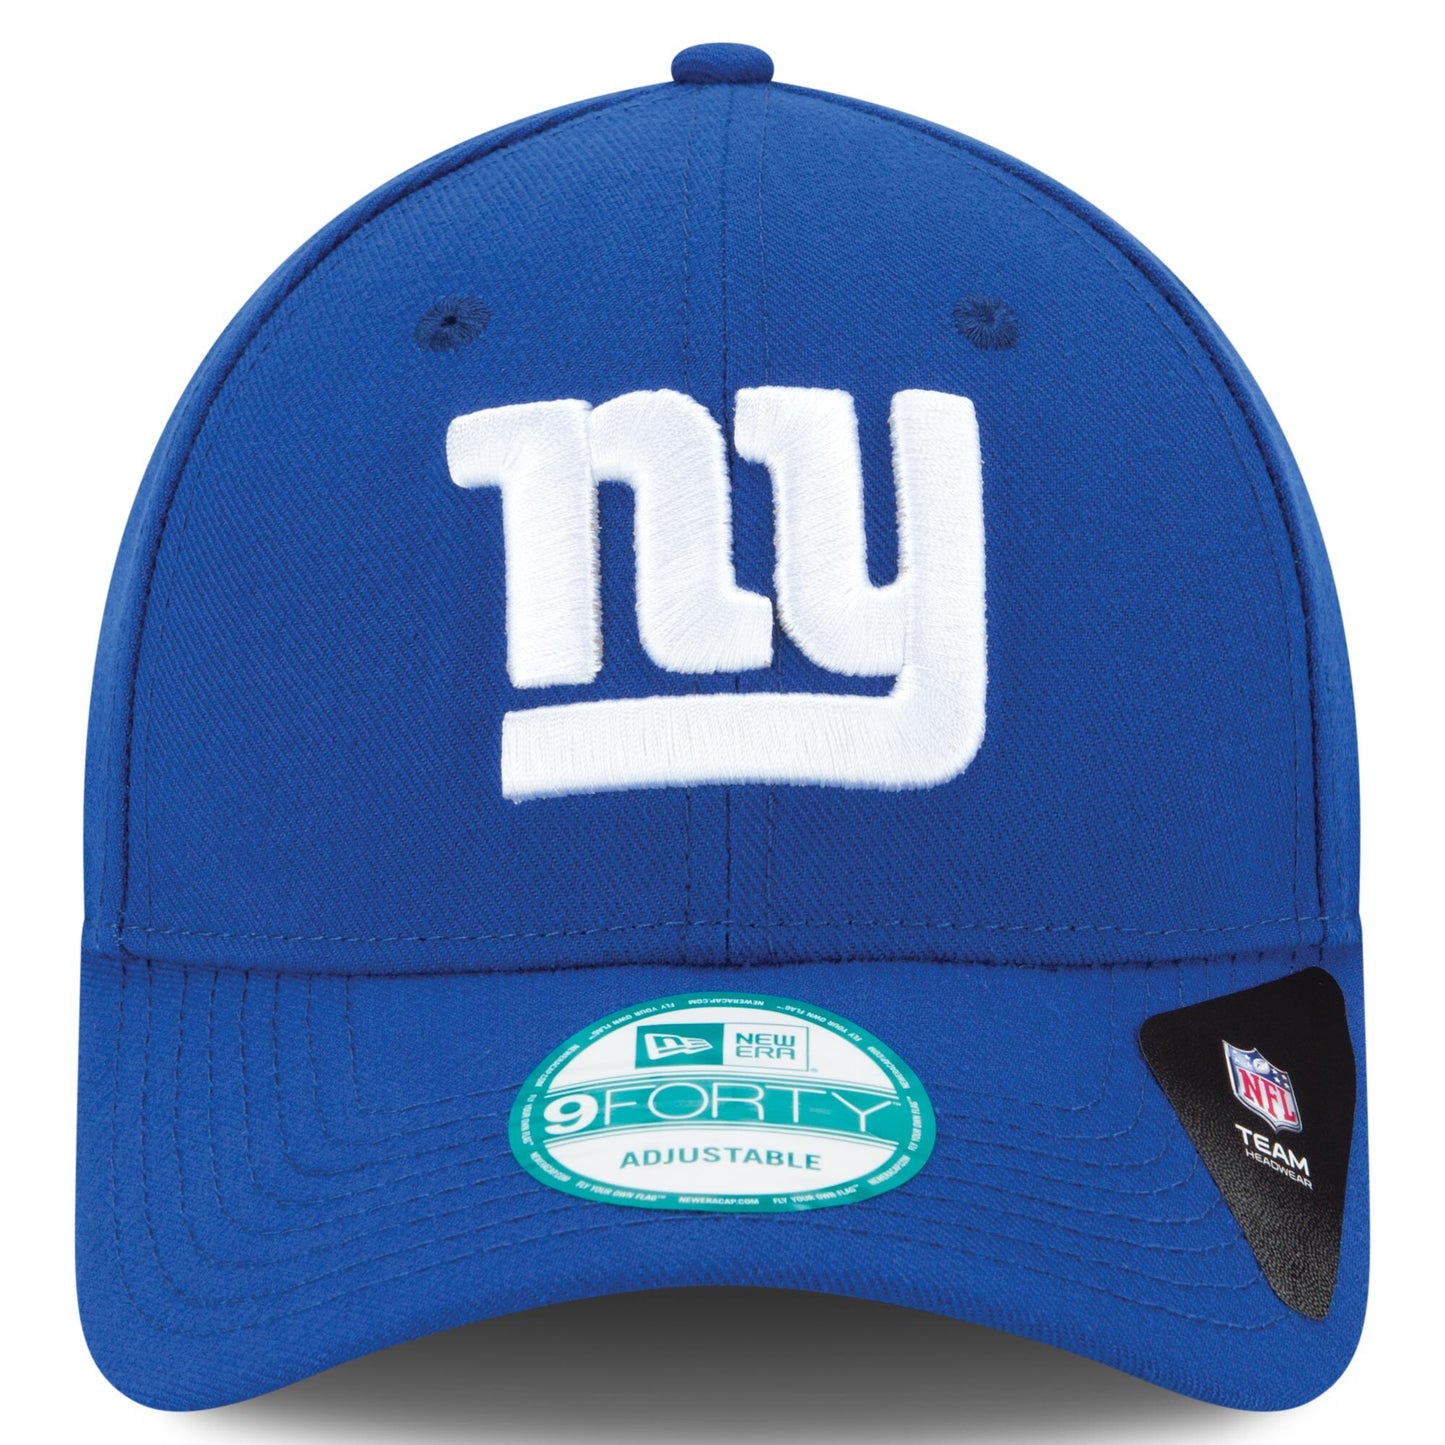 New York Giants Blue The League 9FORTY Adjustable Game Cap